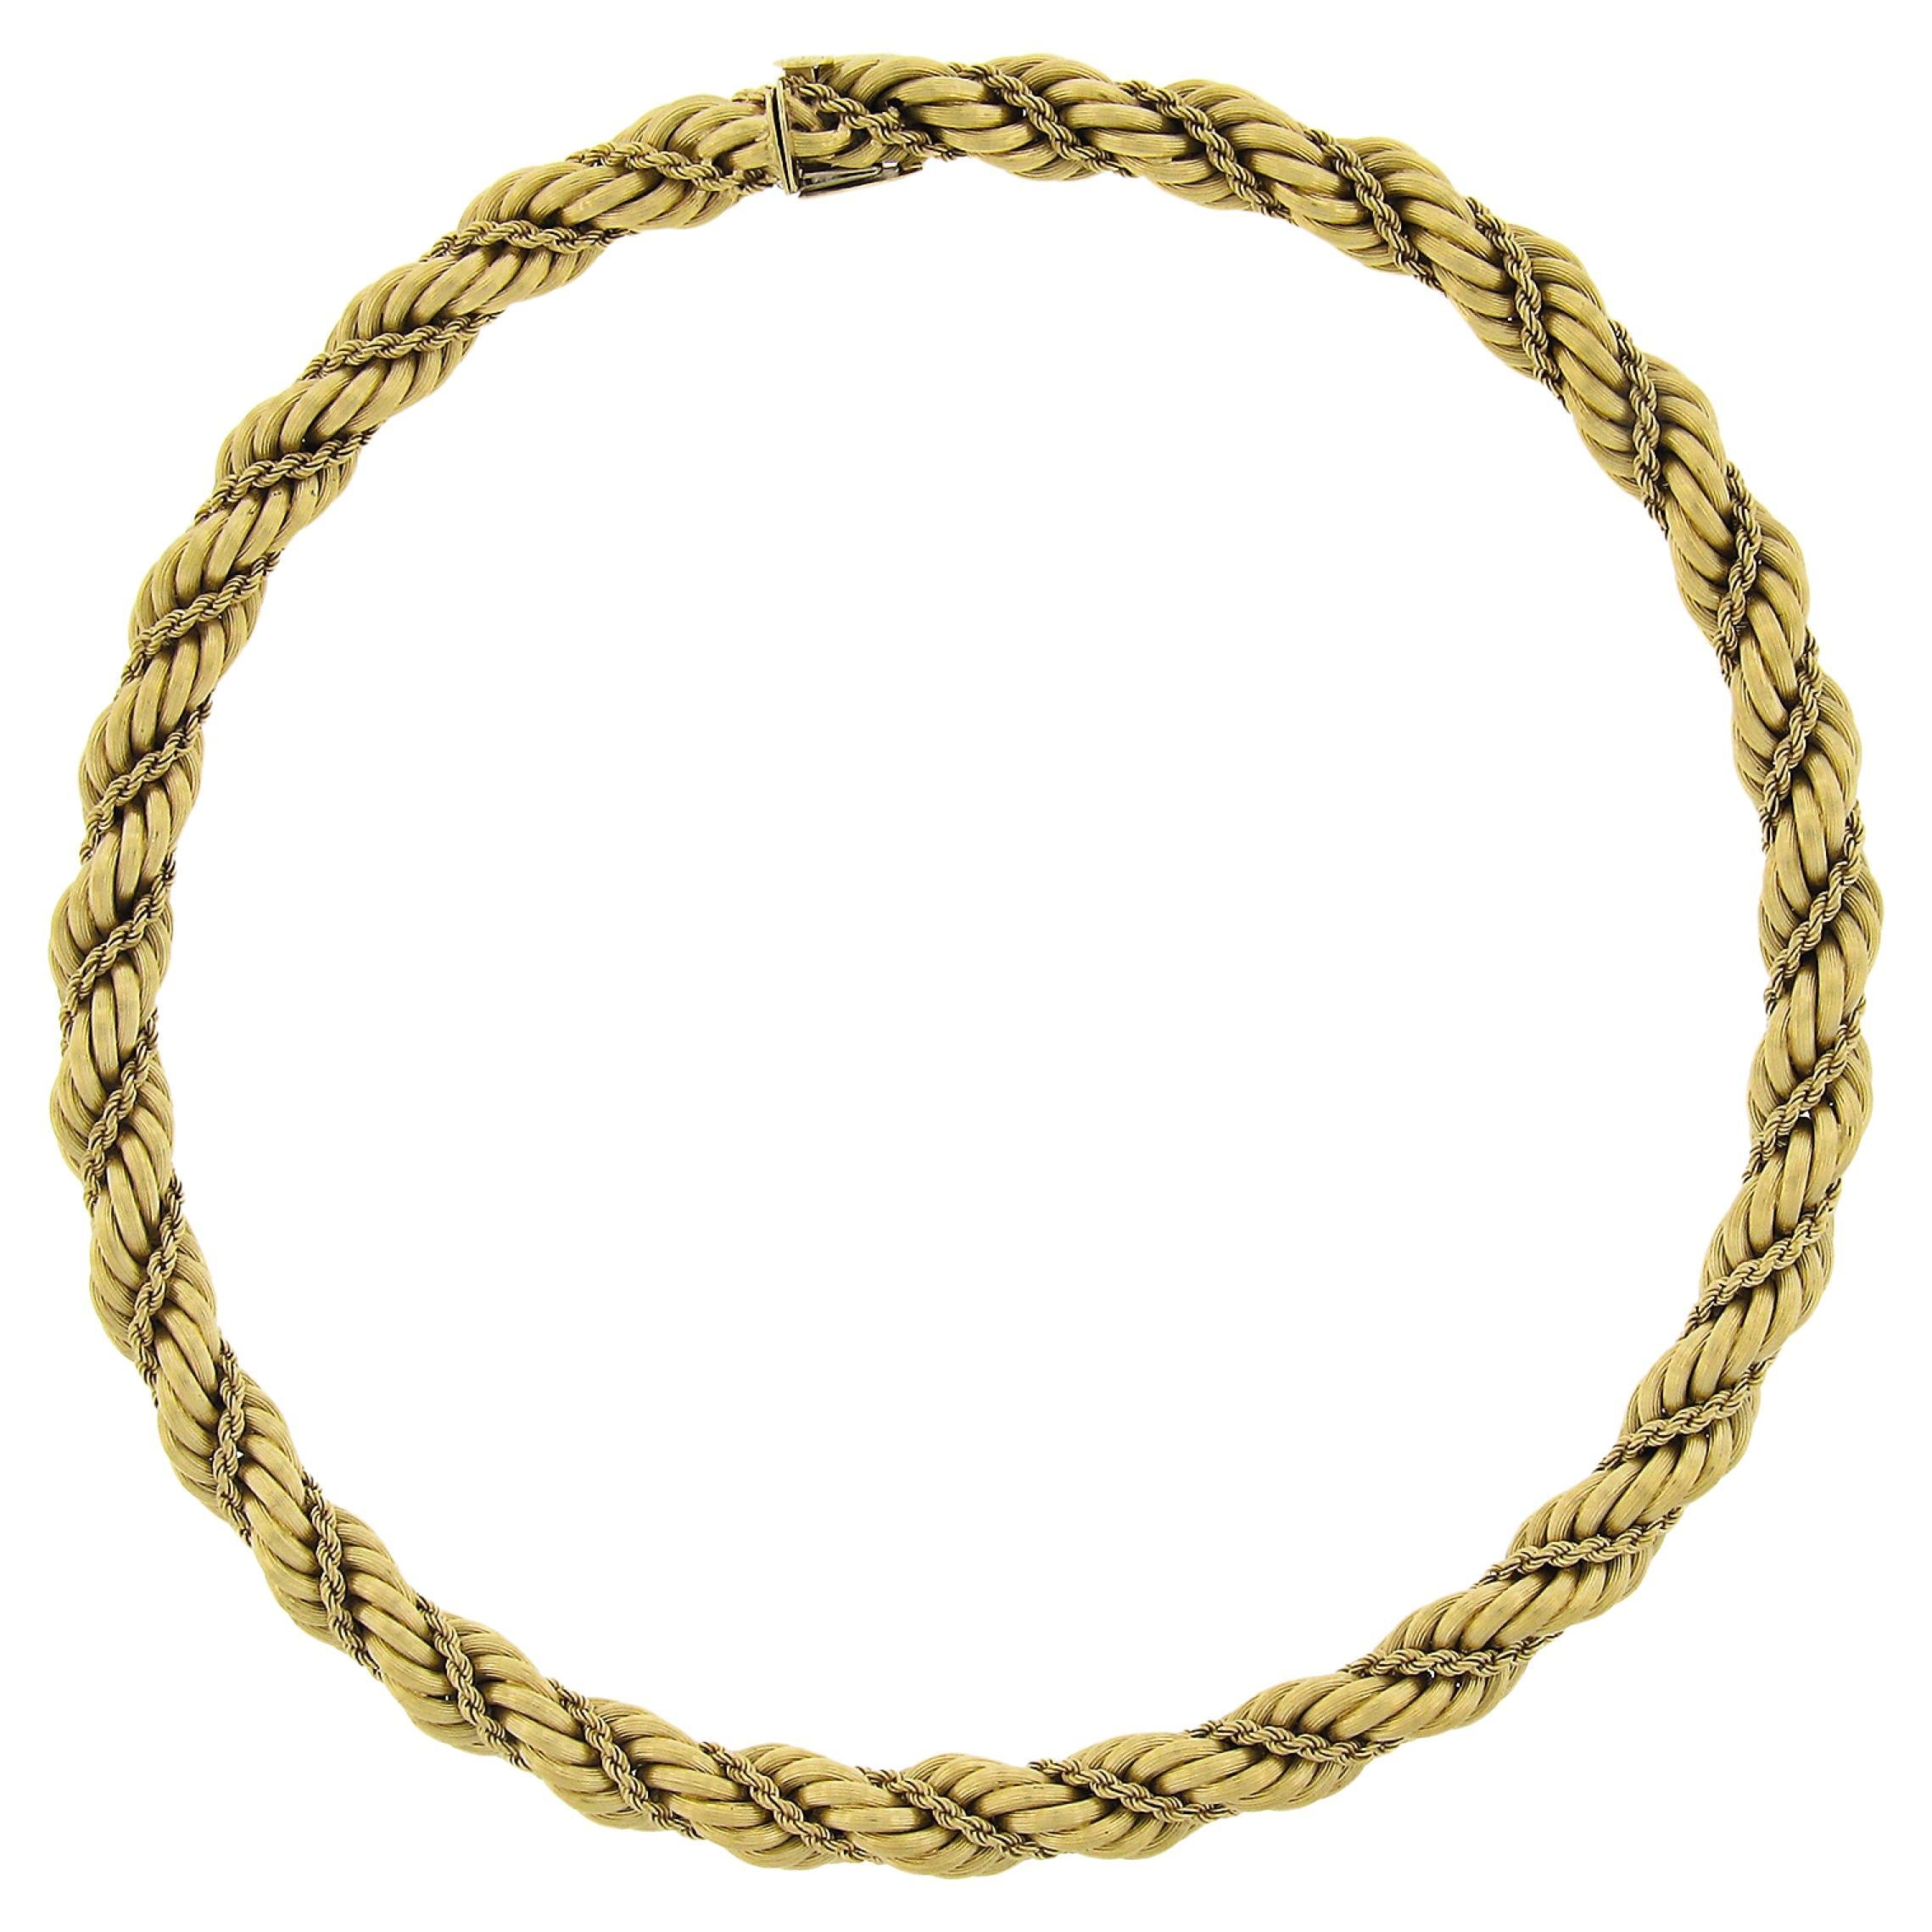 18K Yellow Gold 17.5" 10.3mm Wide Textured Wrapped Rope Link Chain Necklace